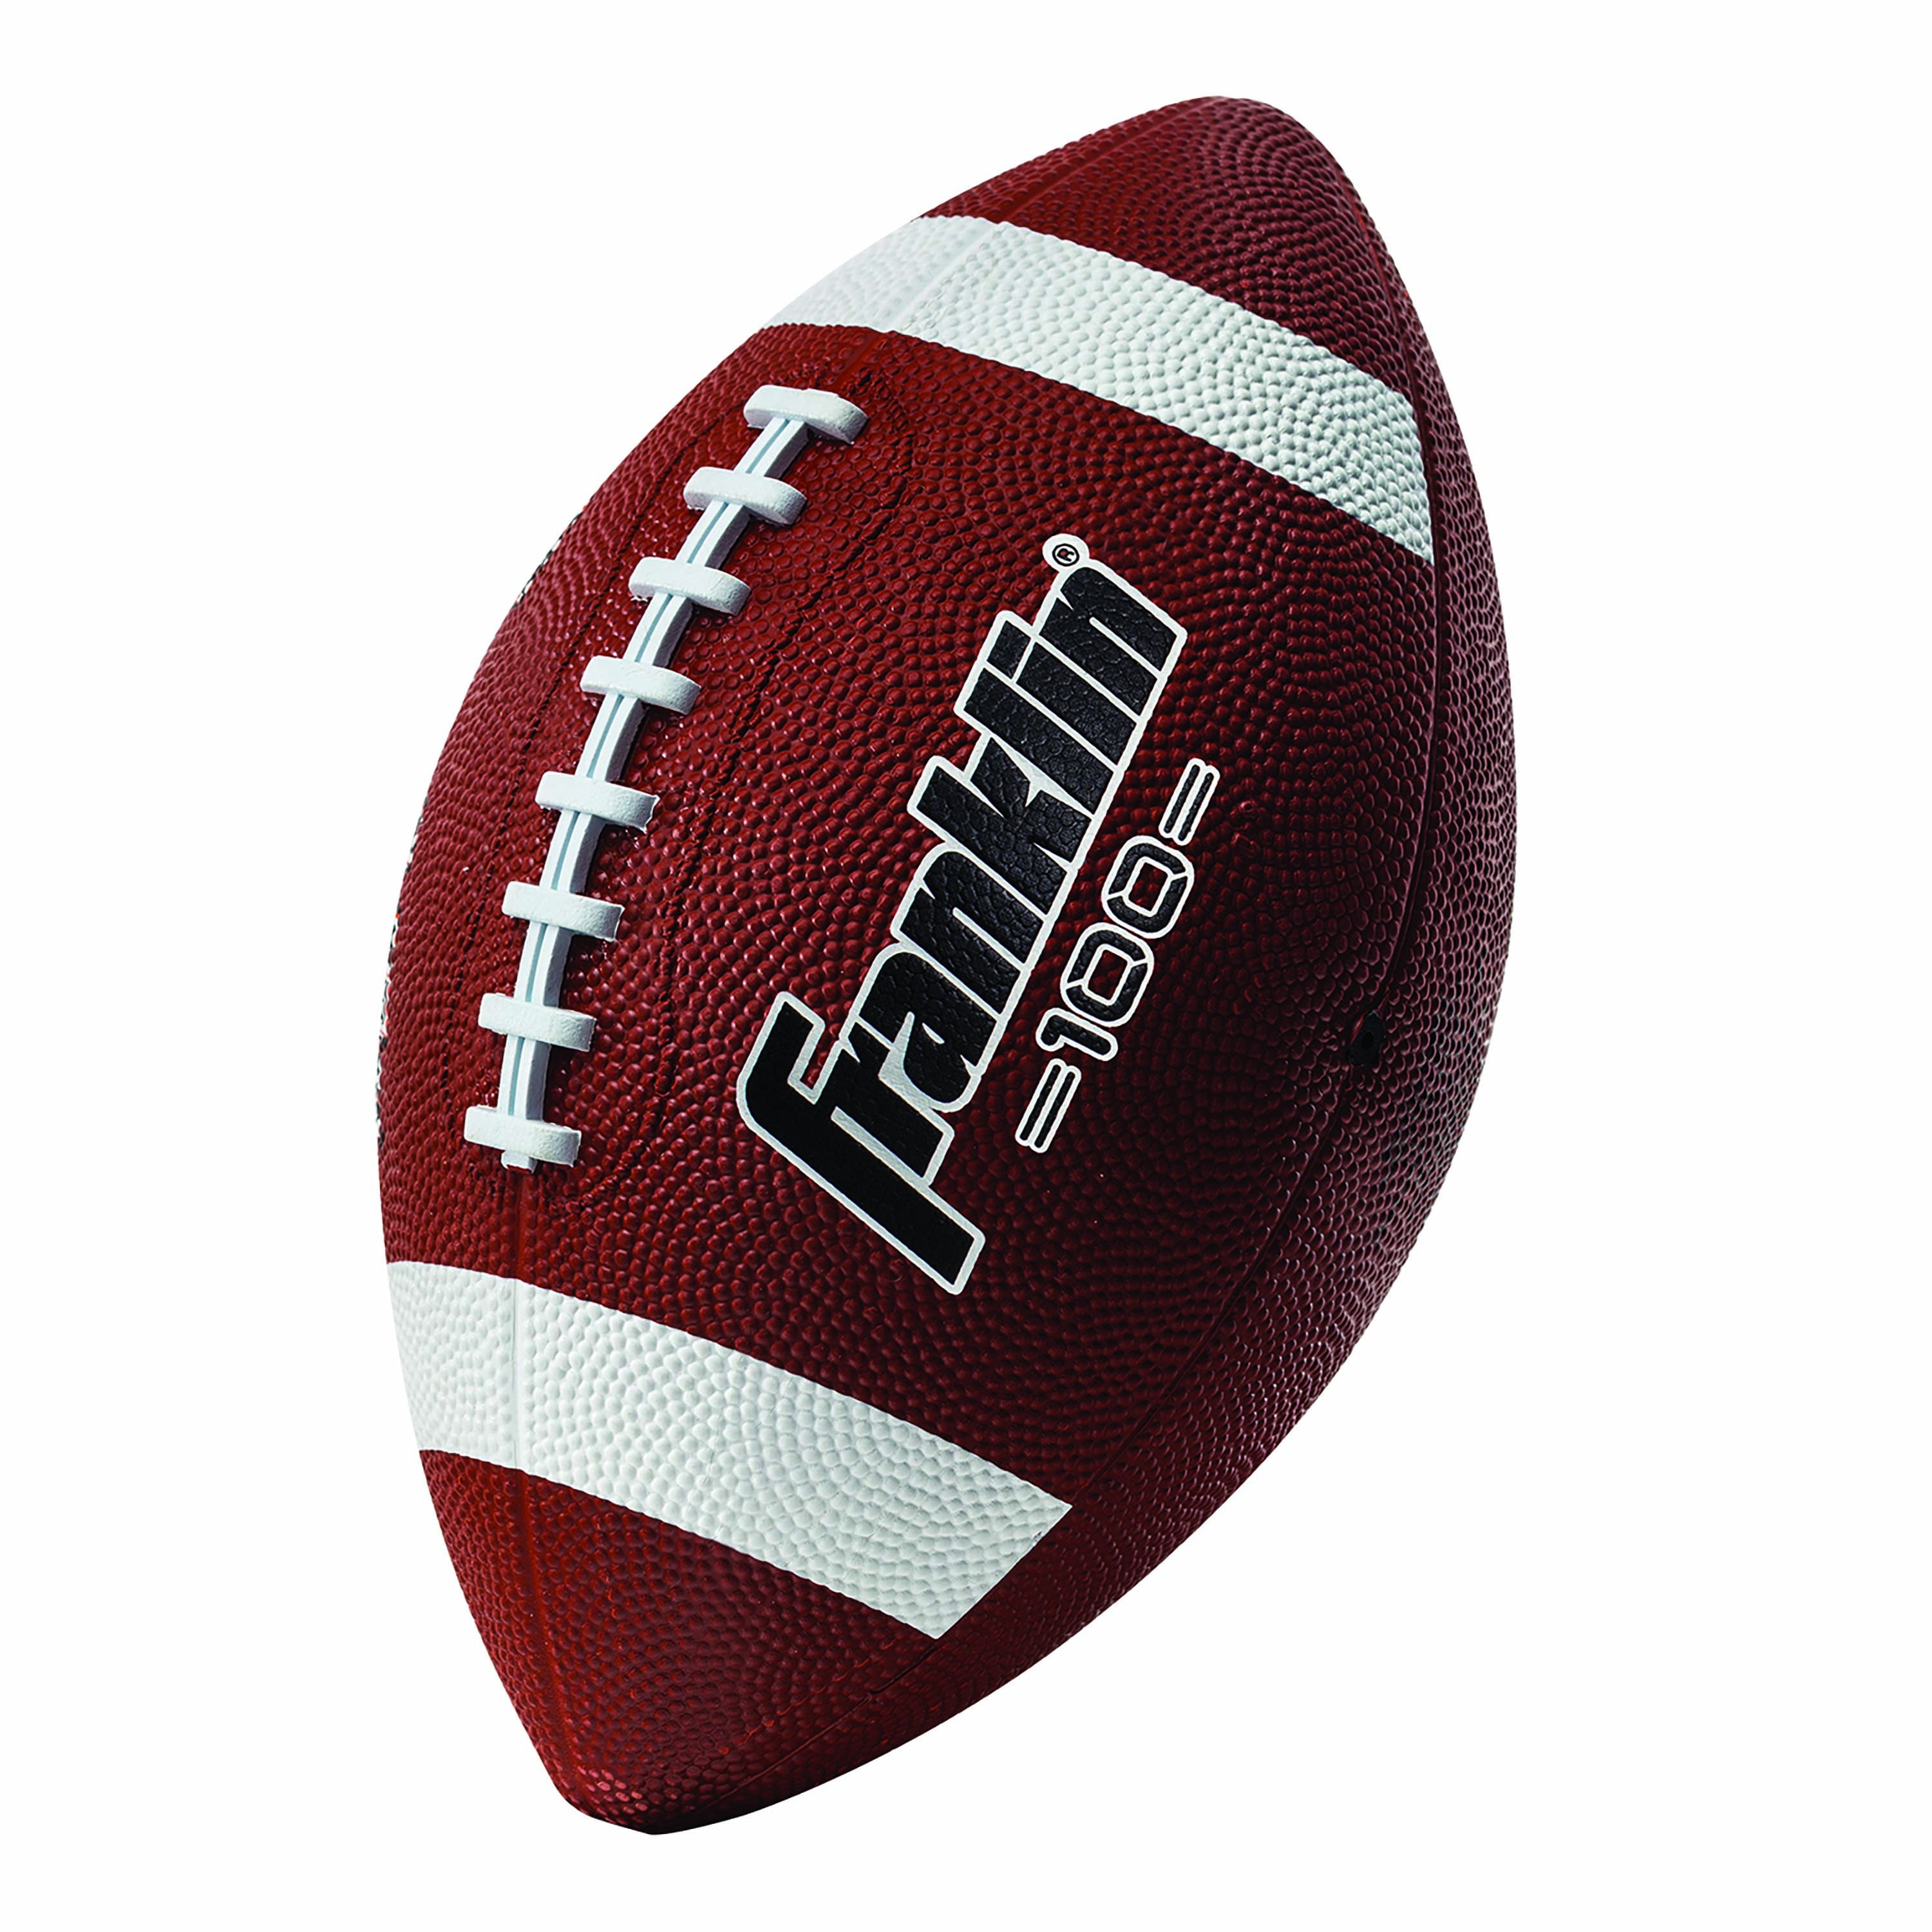 Franklin Official Size Football Durable Super Grip Leather ~NEW~ Free Shipping~ 